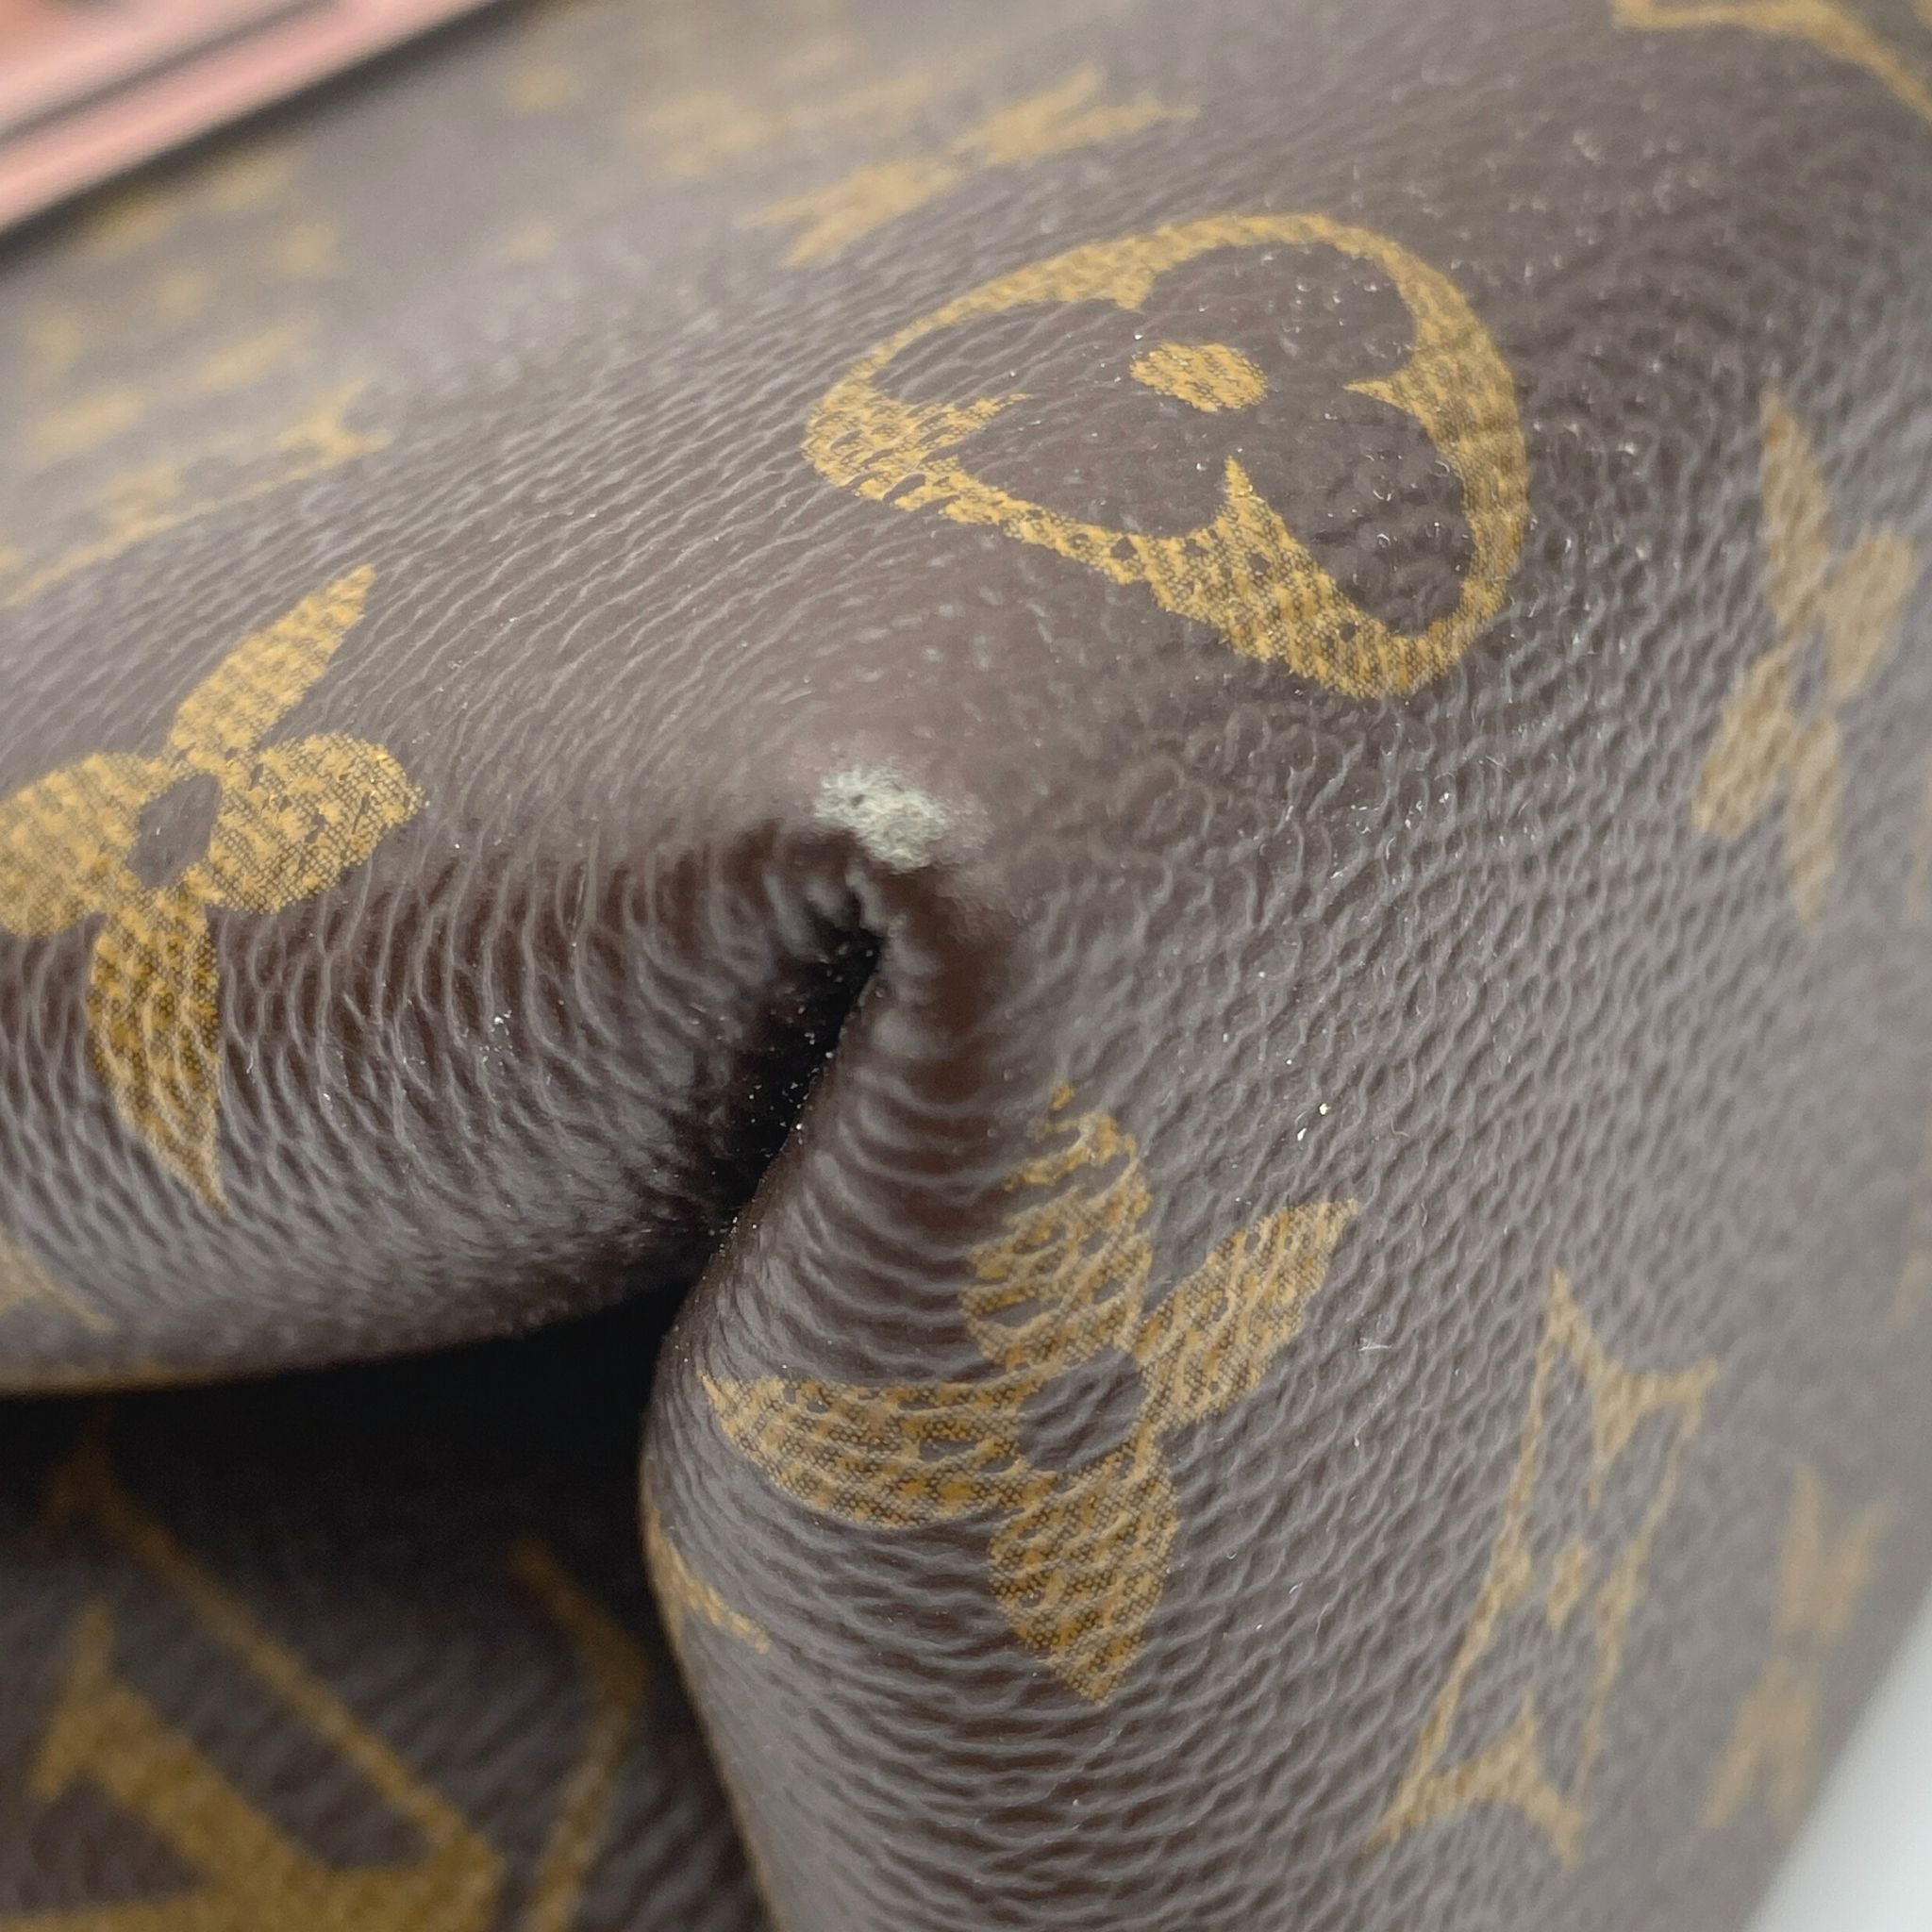 Louis Vuitton Locky Monogram BB Rose Poudre in Coated Canvas